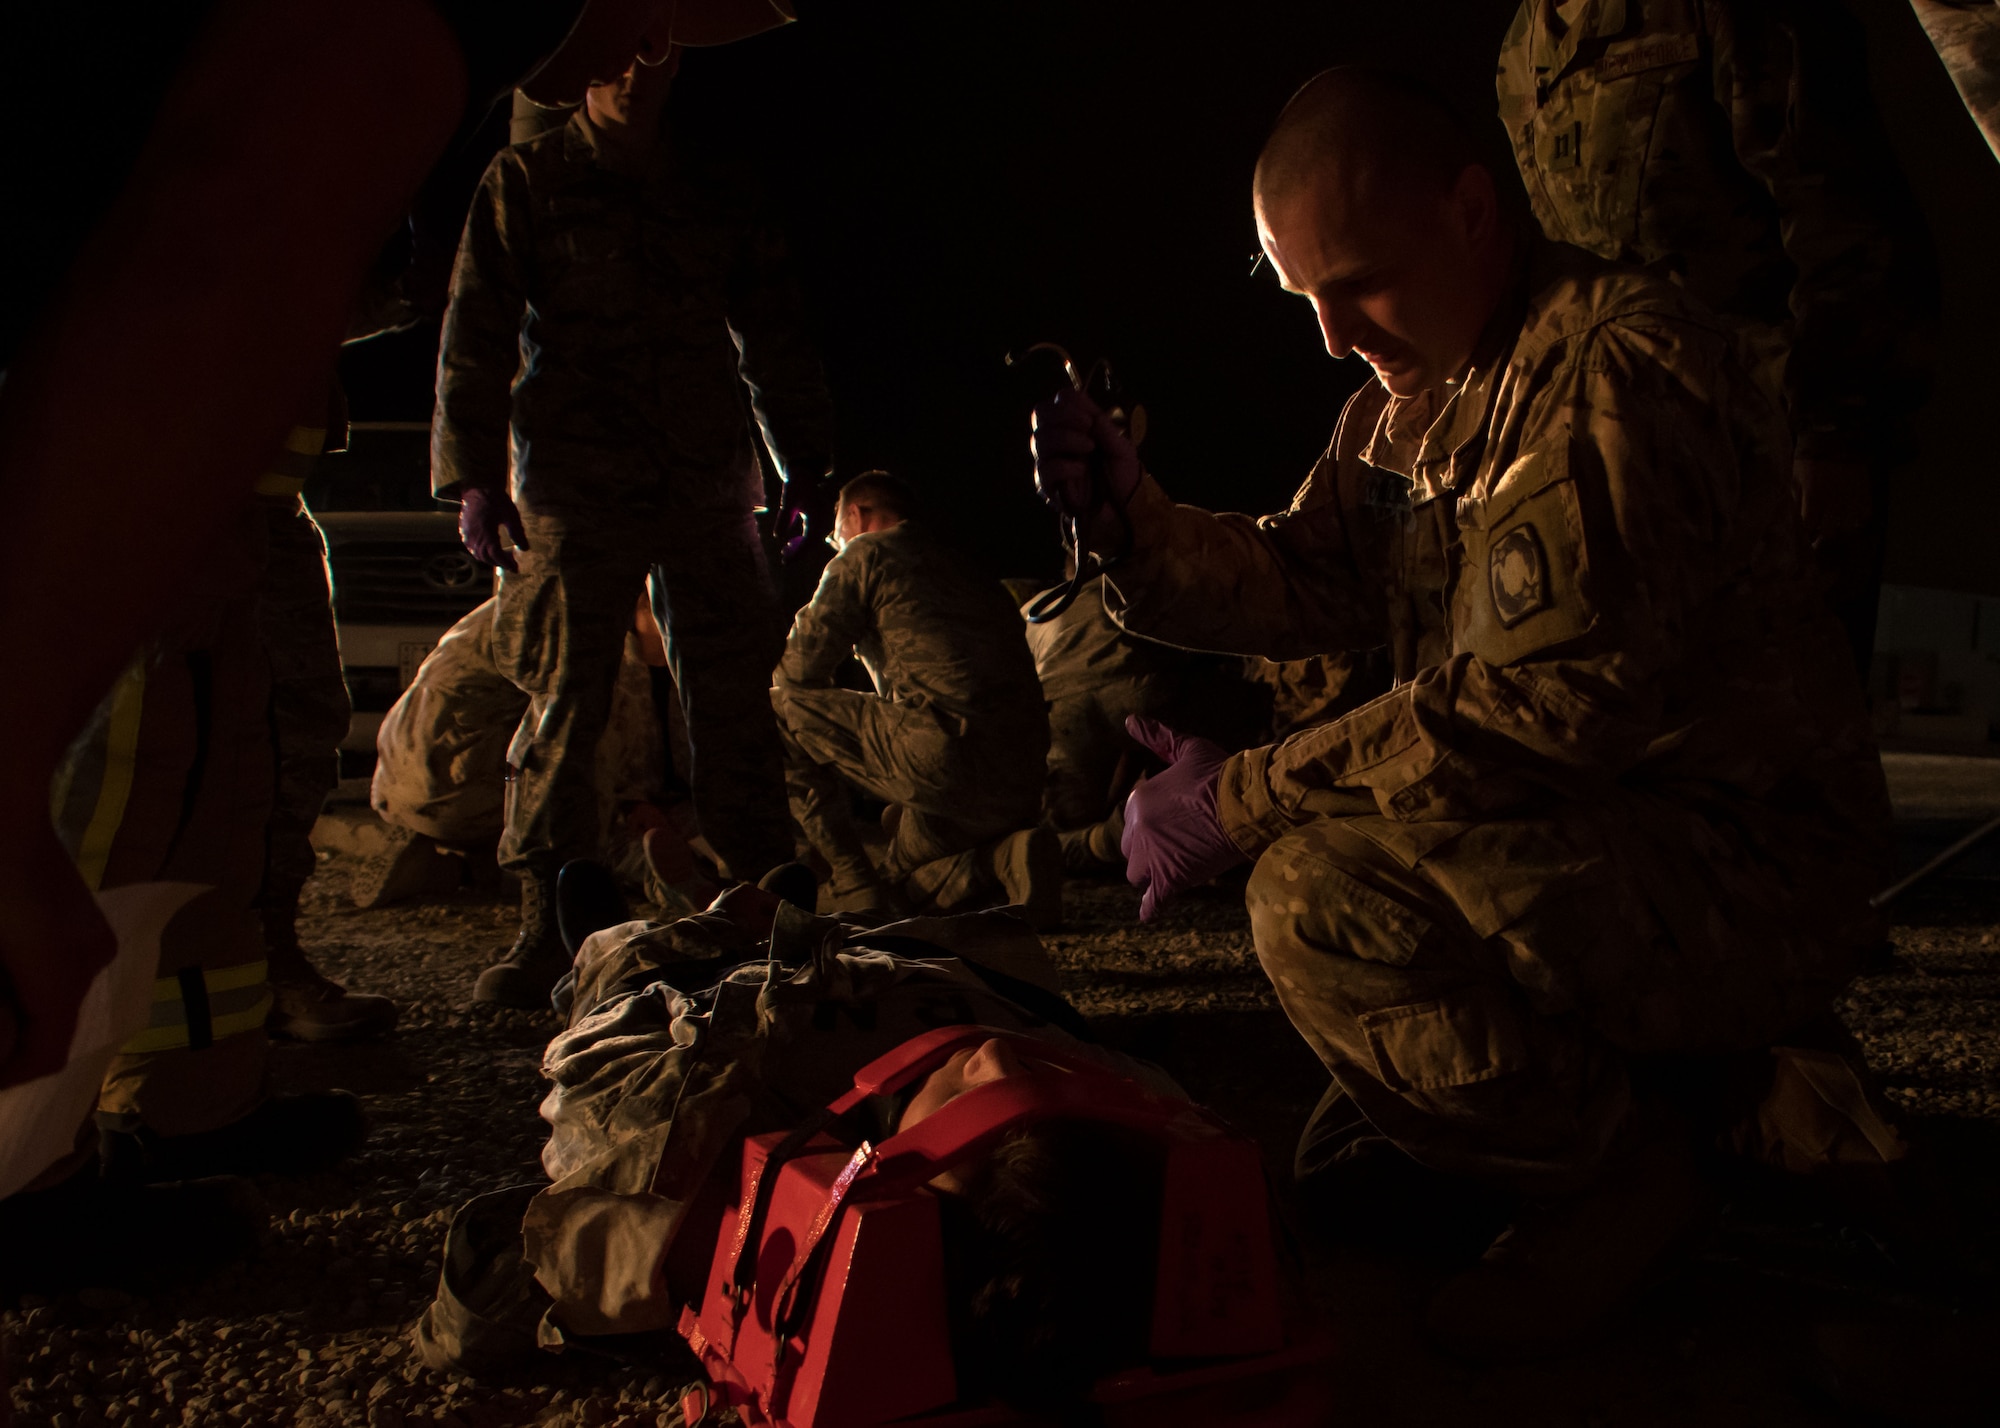 A U.S. Army medic, right, inspects a patient during a drill at an undisclosed location in Southwest Asia March 10, 2017. A group of firefighters and medics worked together to stabilize the patient and secured the patient’s head in preparation for medical transport. (U.S. Air Force photo/Senior Airman Andrew Park)